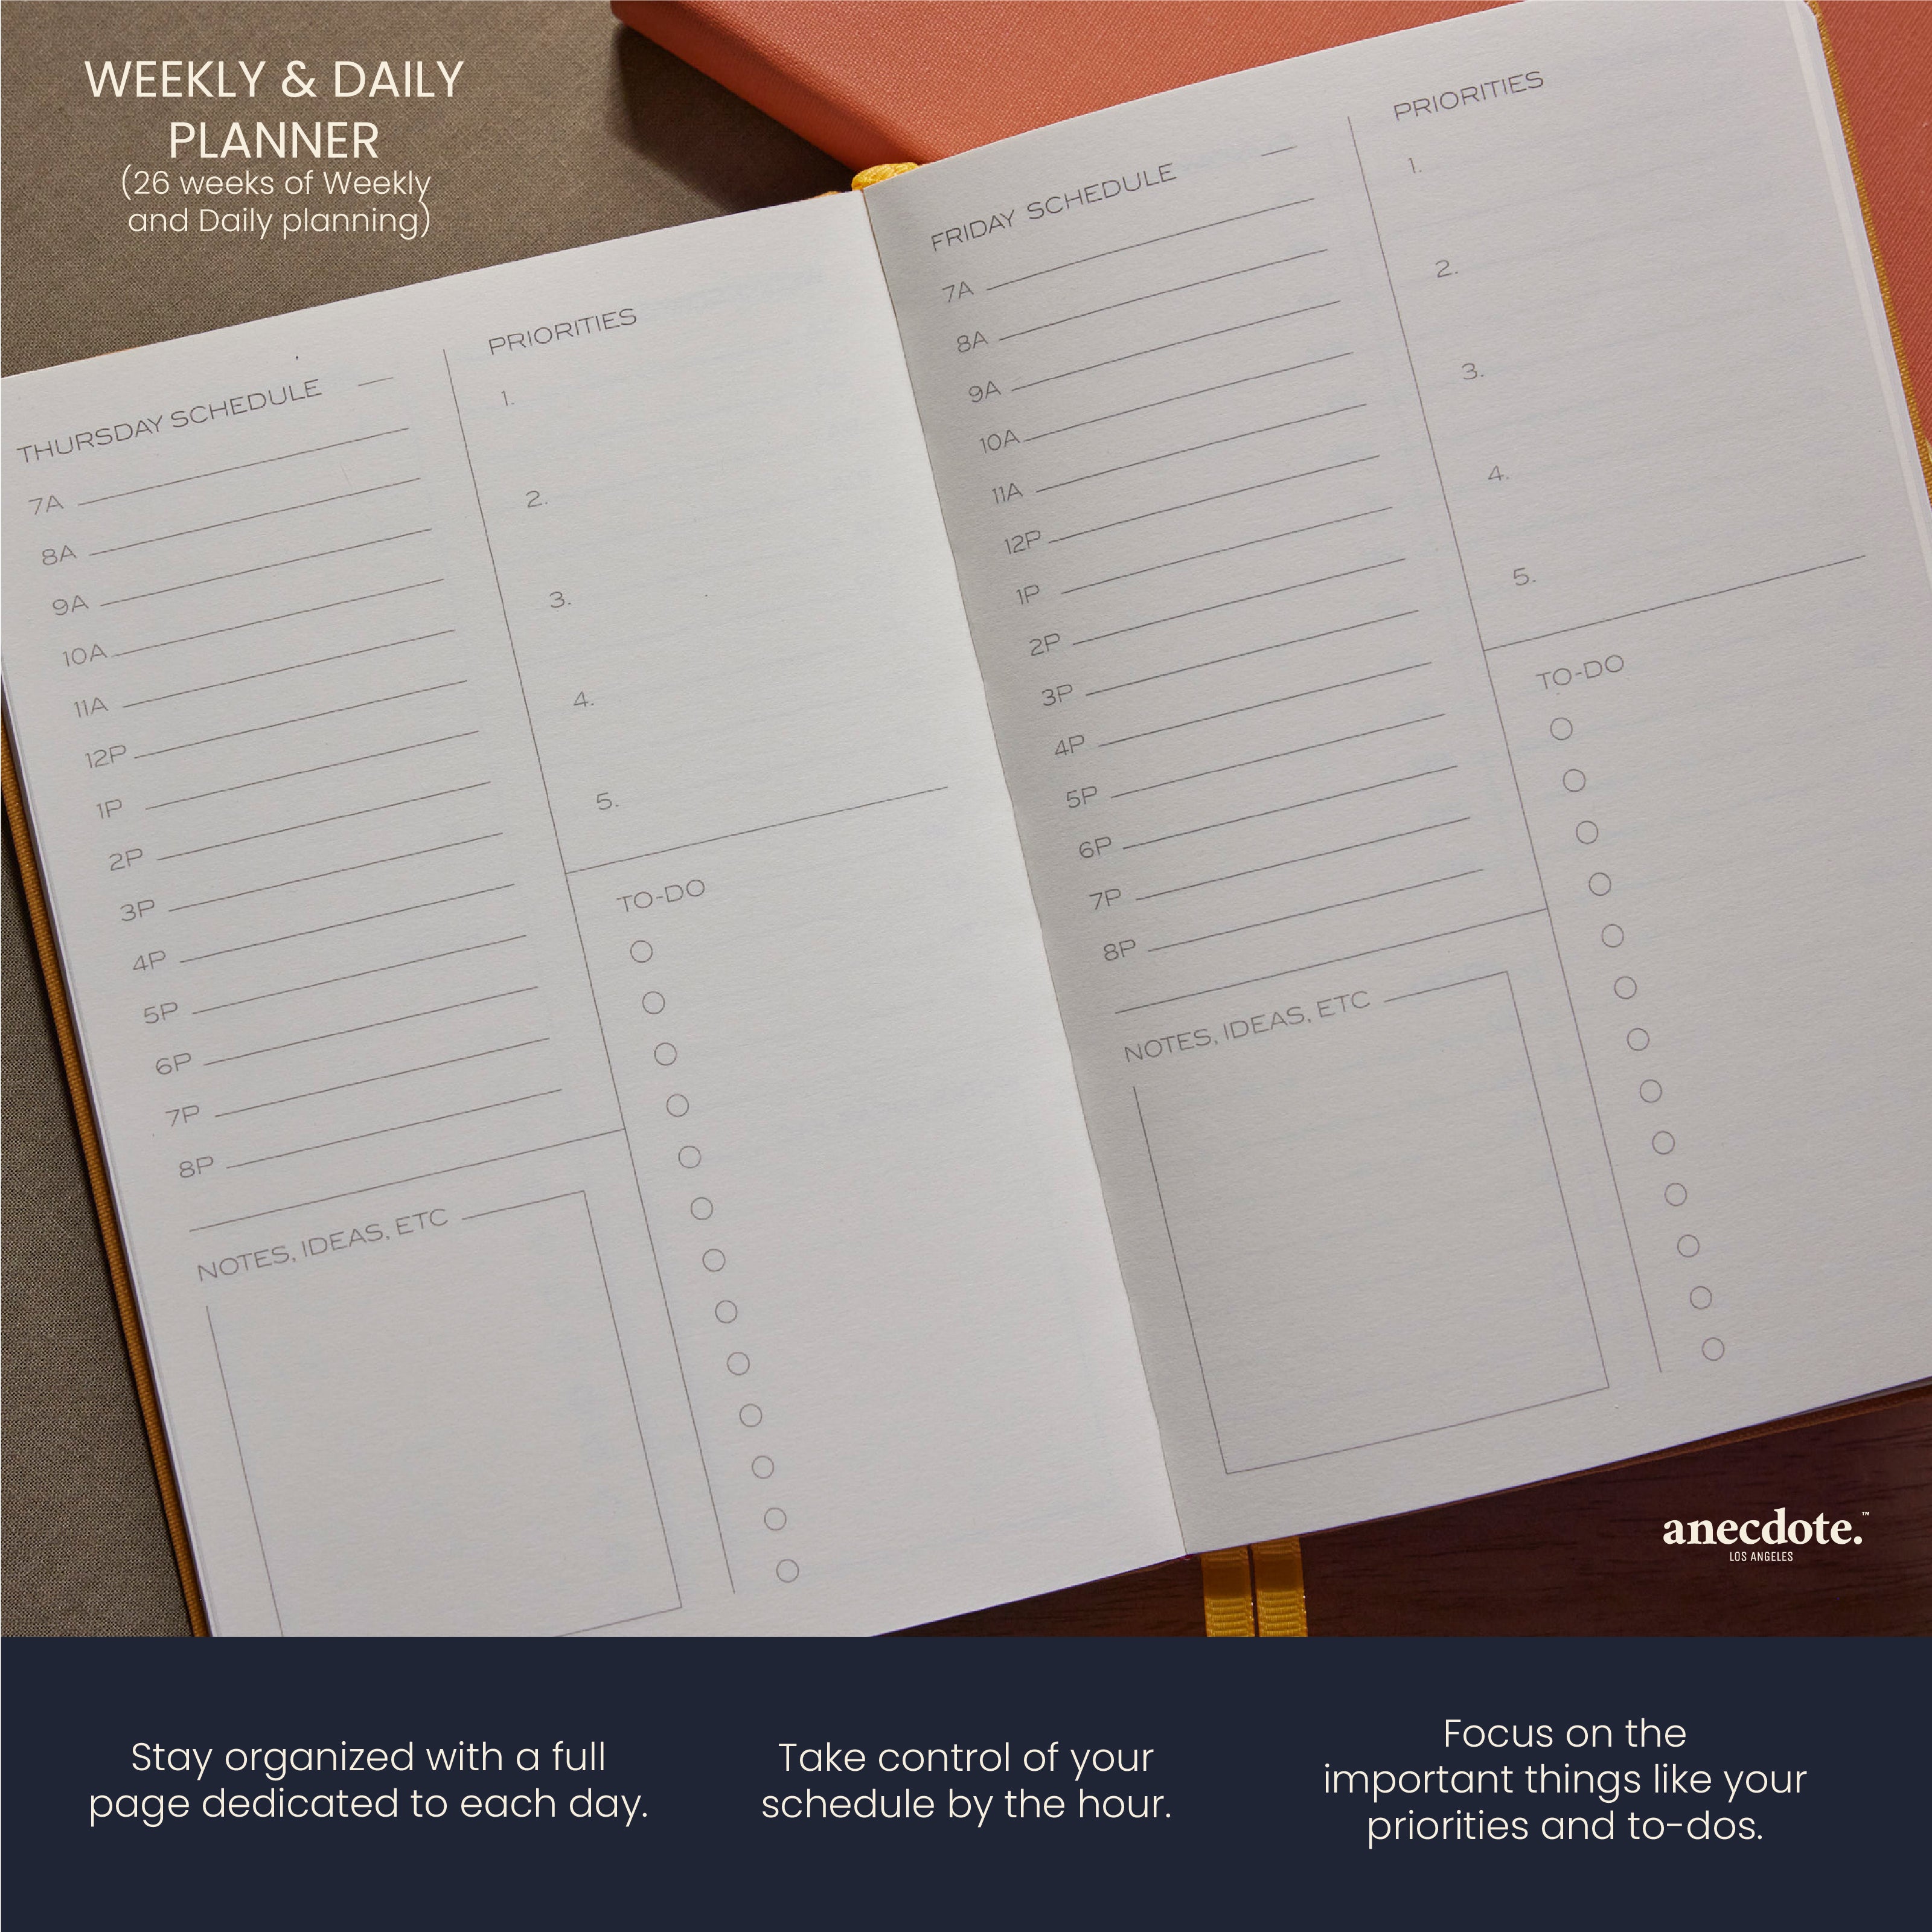 The Daily Planner